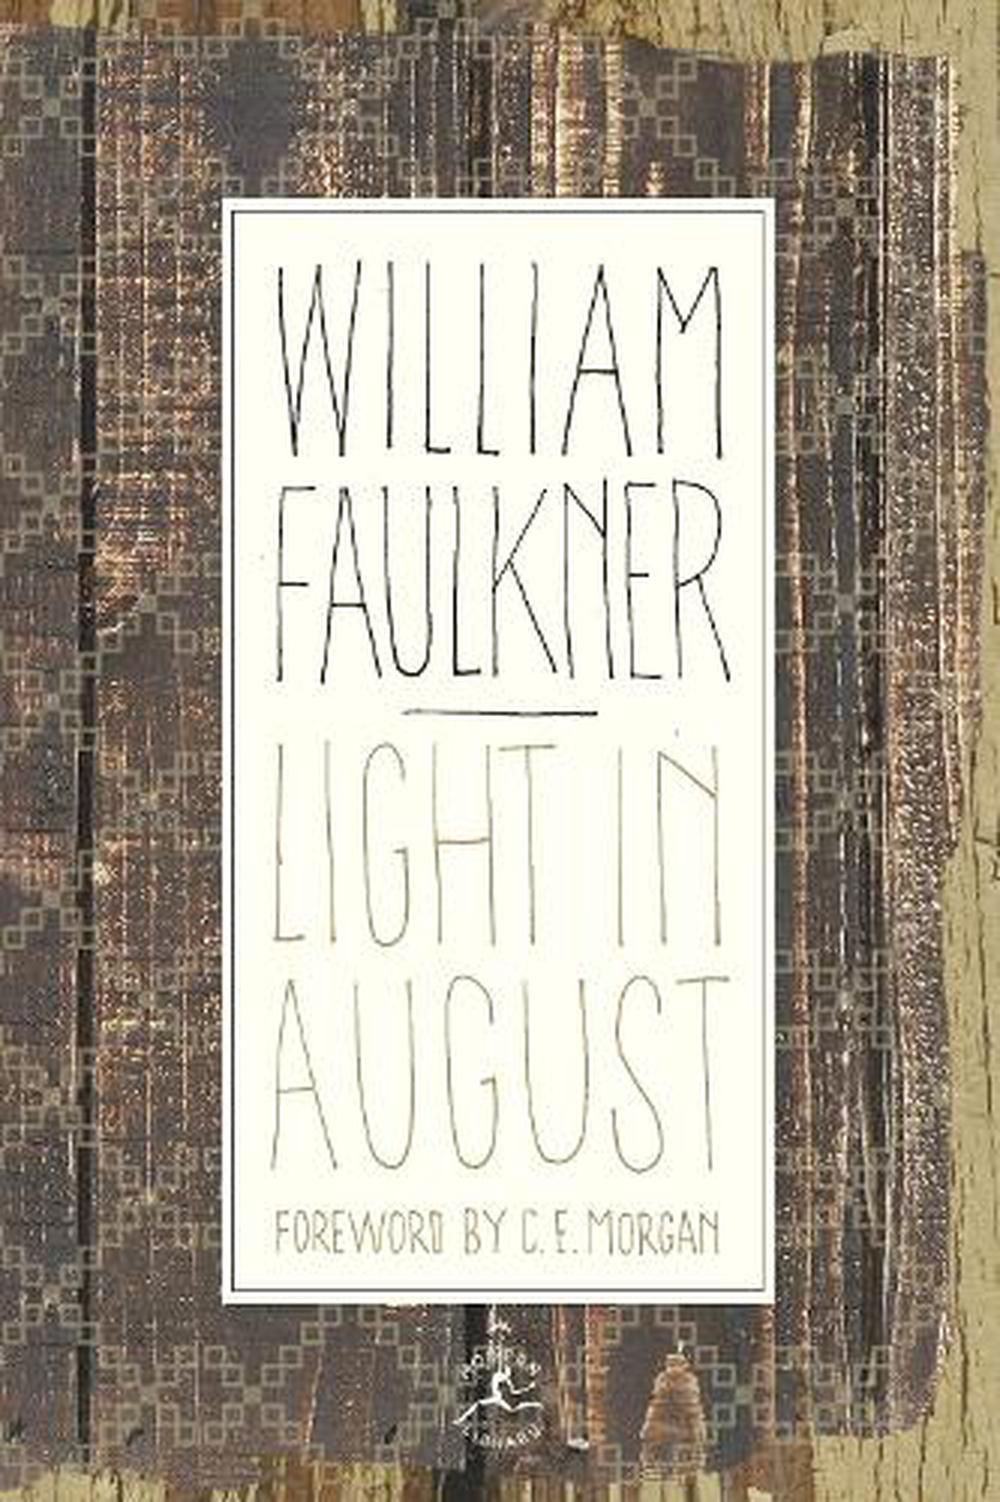 light in august first edition